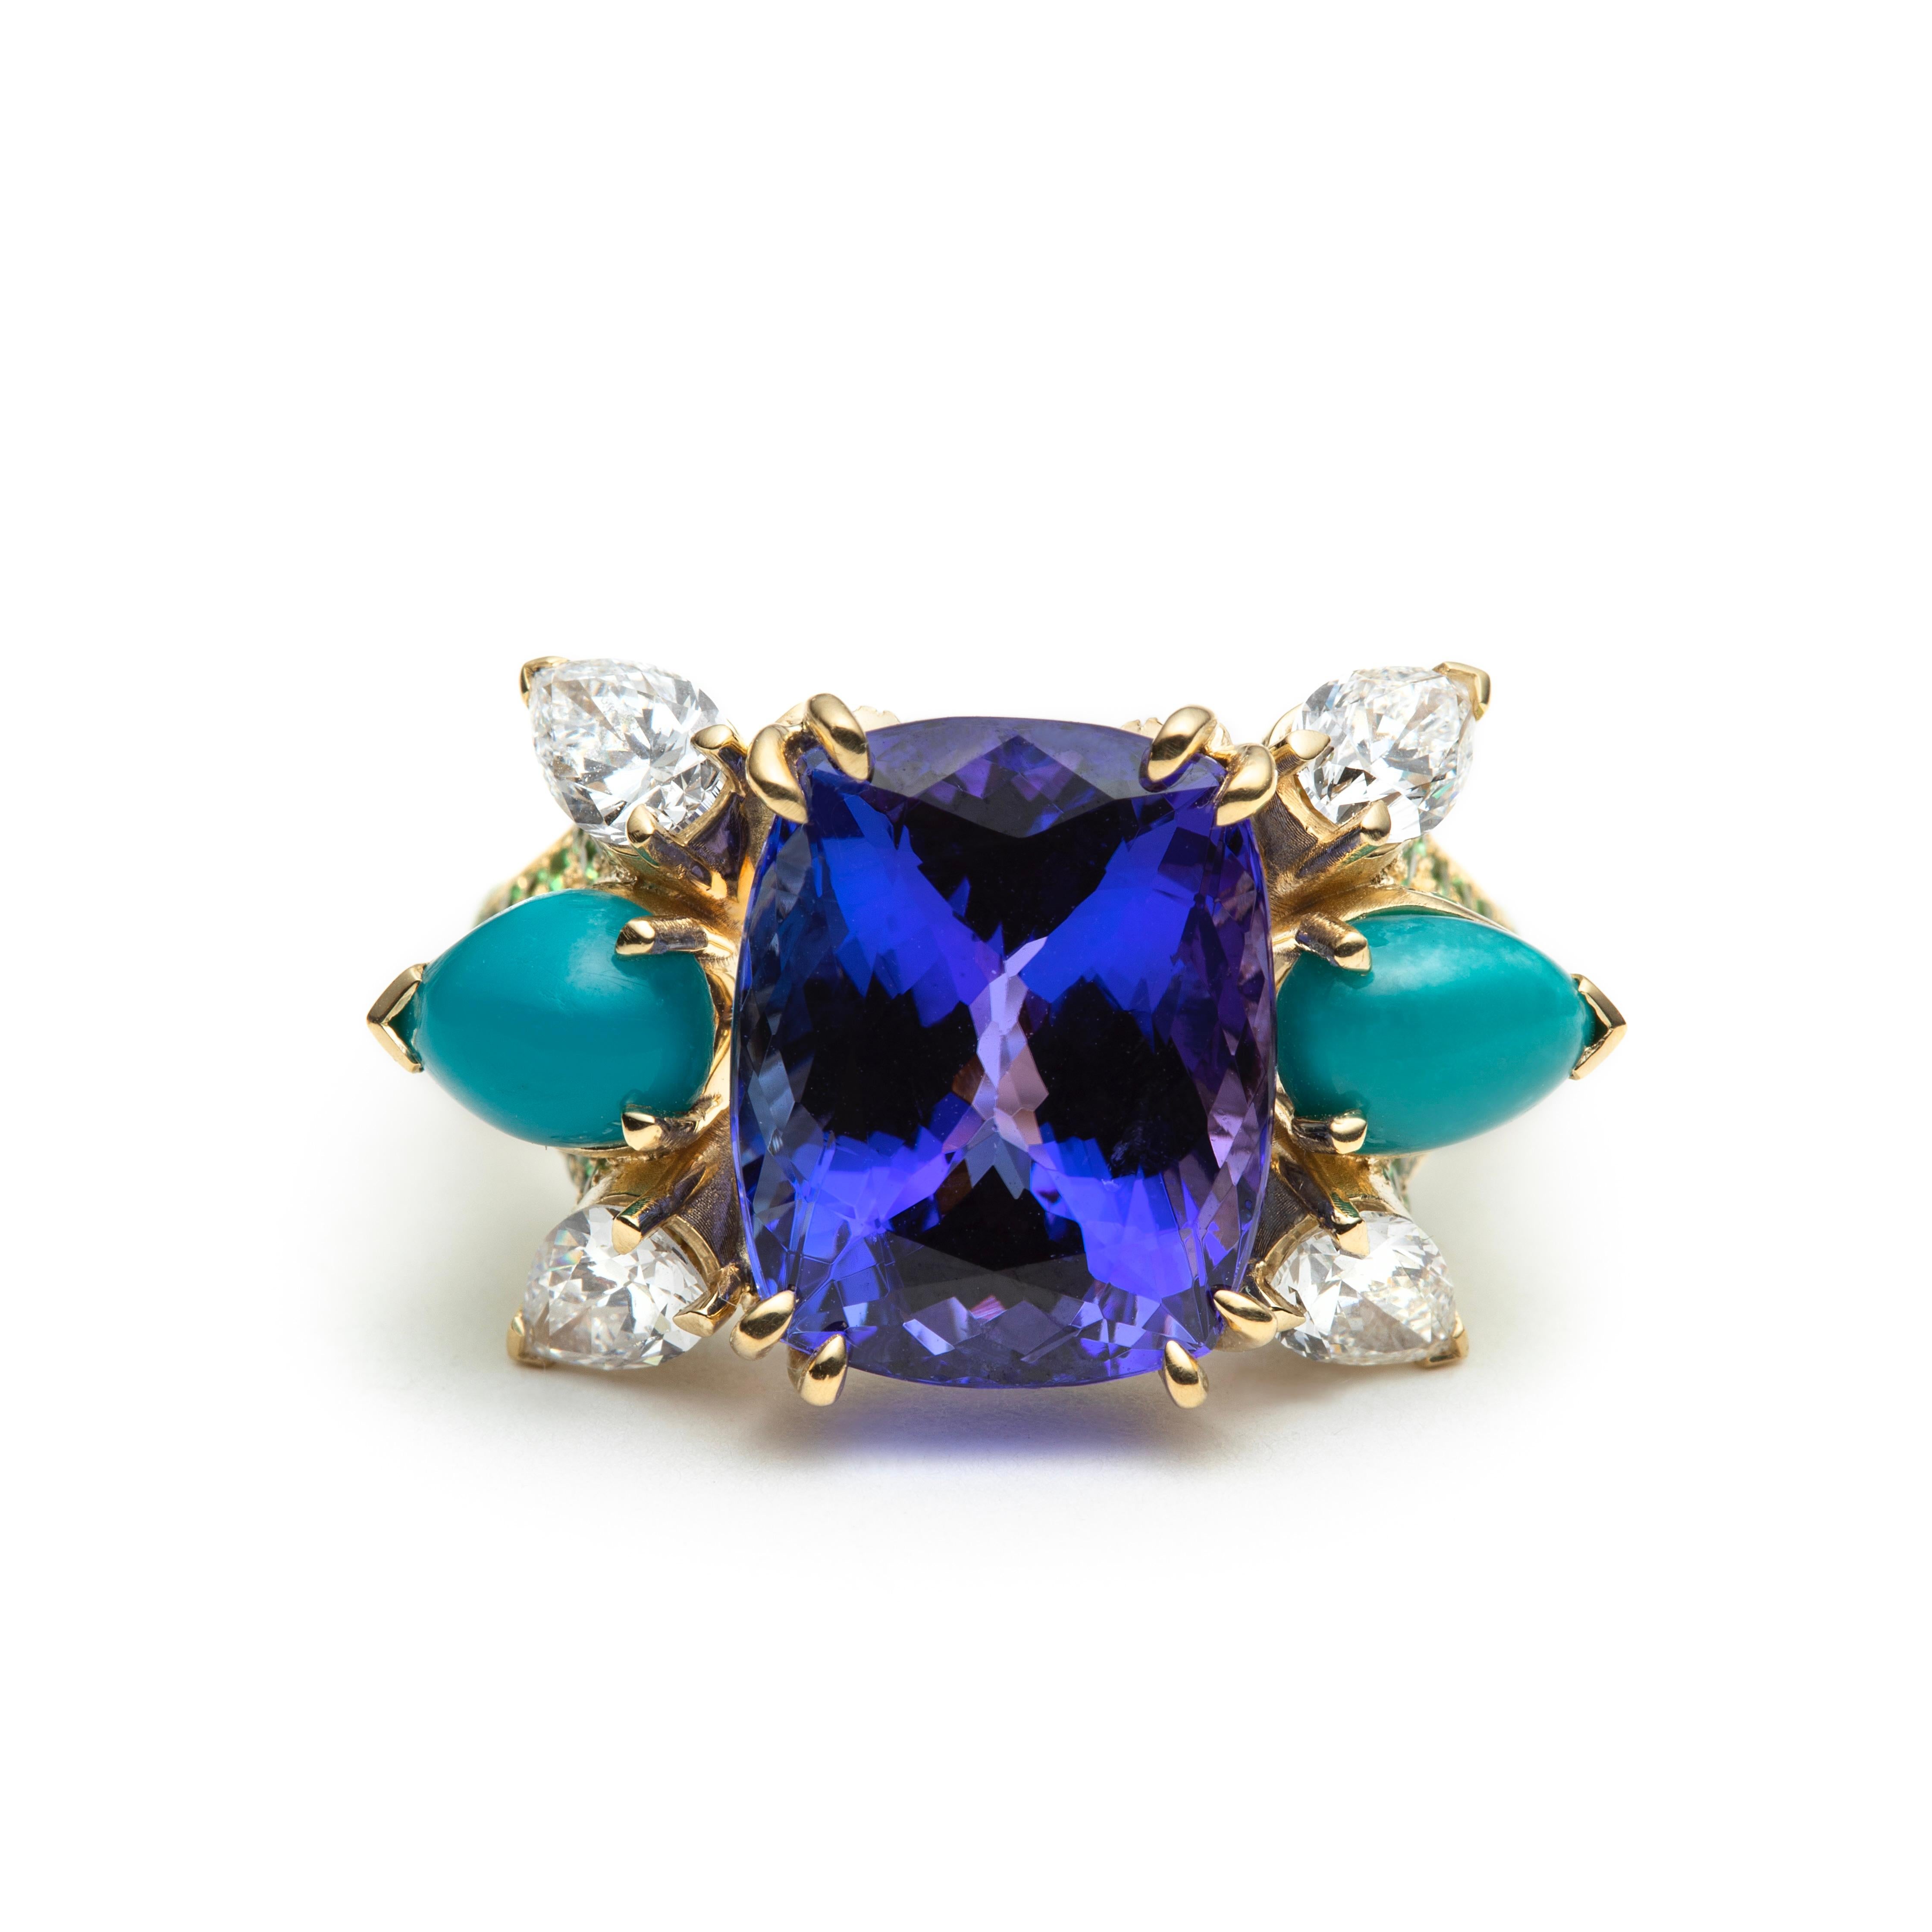 Our Drakaina ring is an eye-catching one-of-a-kind ring in 18K yellow gold with a highly polished finish. The vivid purplish-blue, cushion cut tanzanite is held in place by four double prongs that sit in a U setting. It weighs 9.6 carat. The fancy V